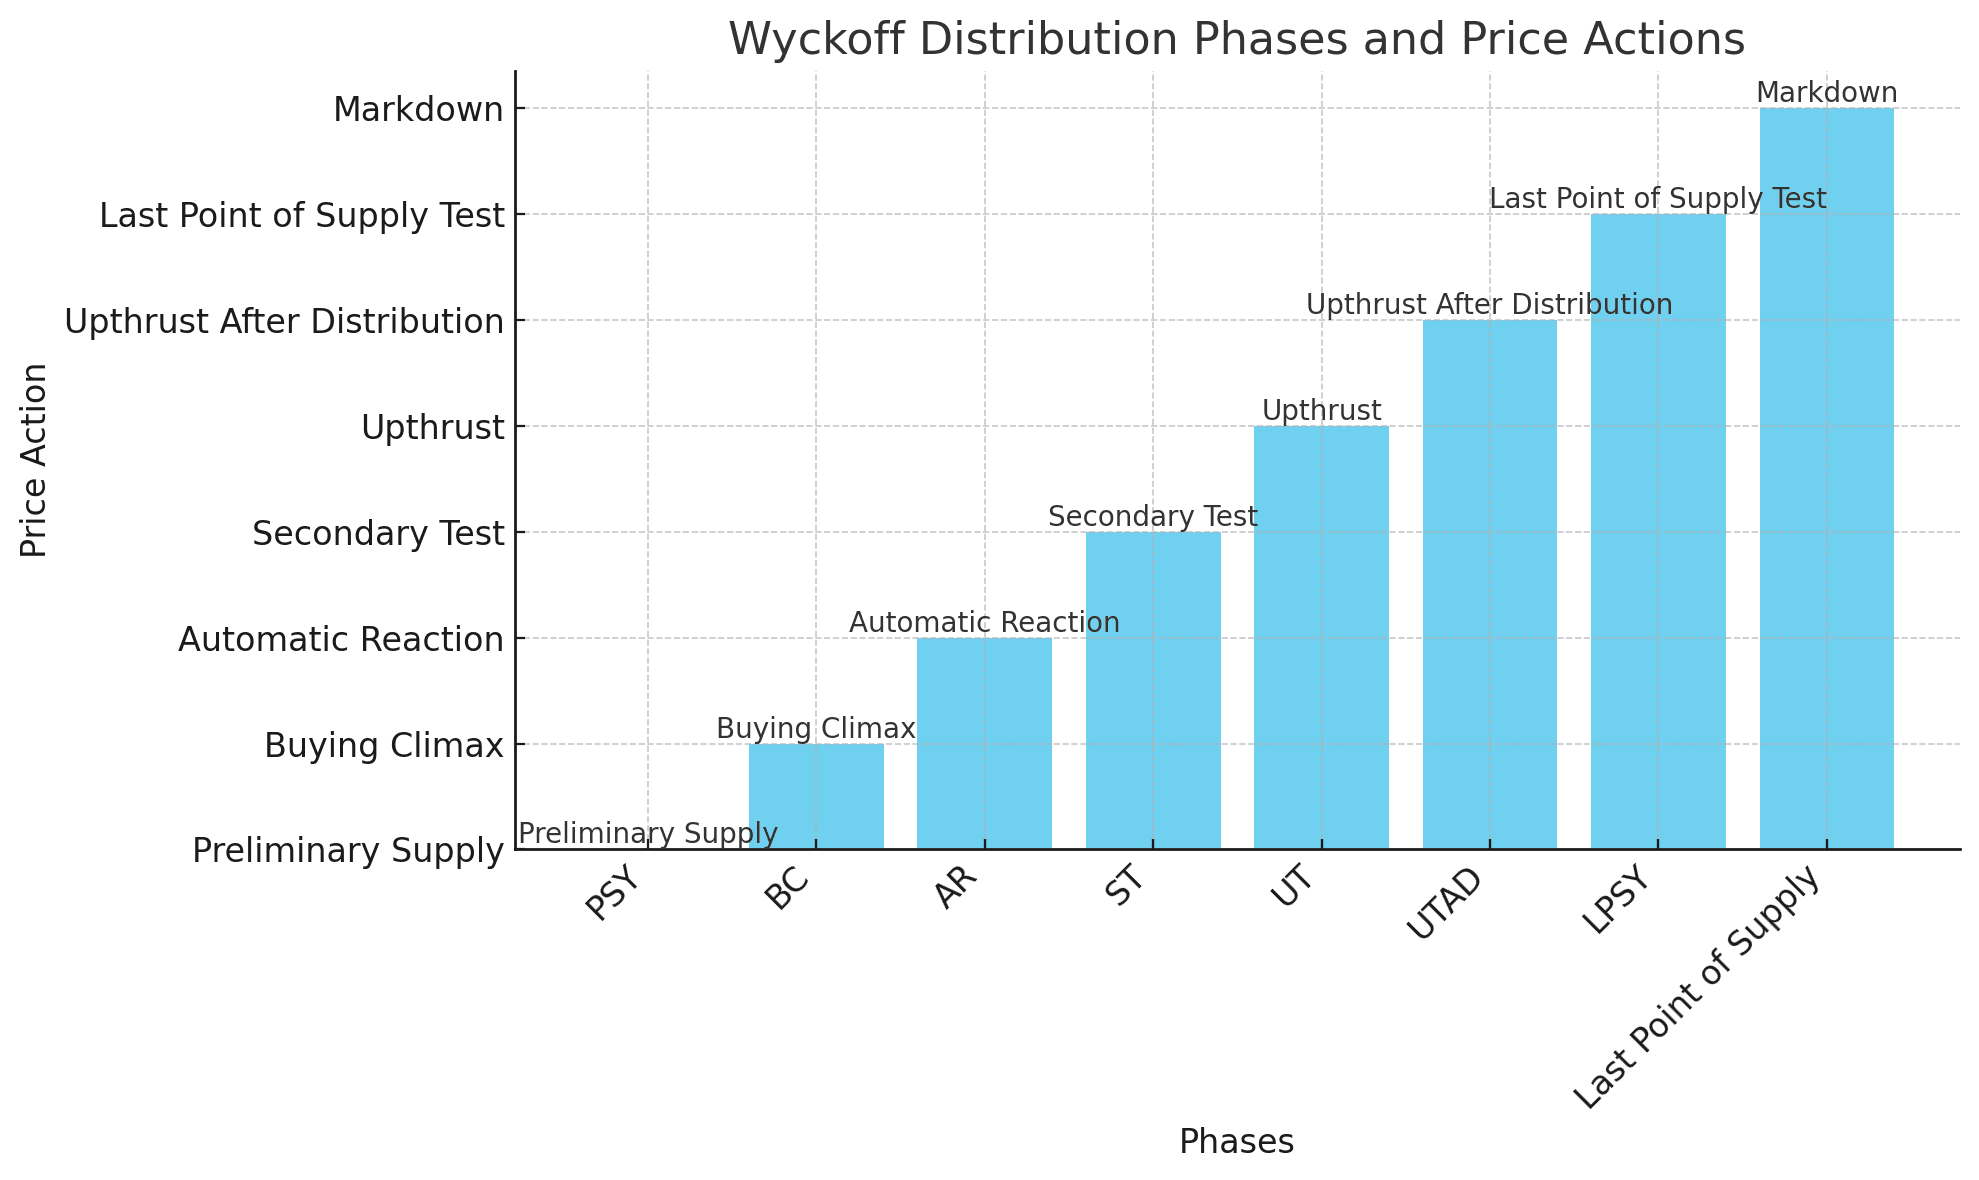 chart showing Wyckoff Distribution phases